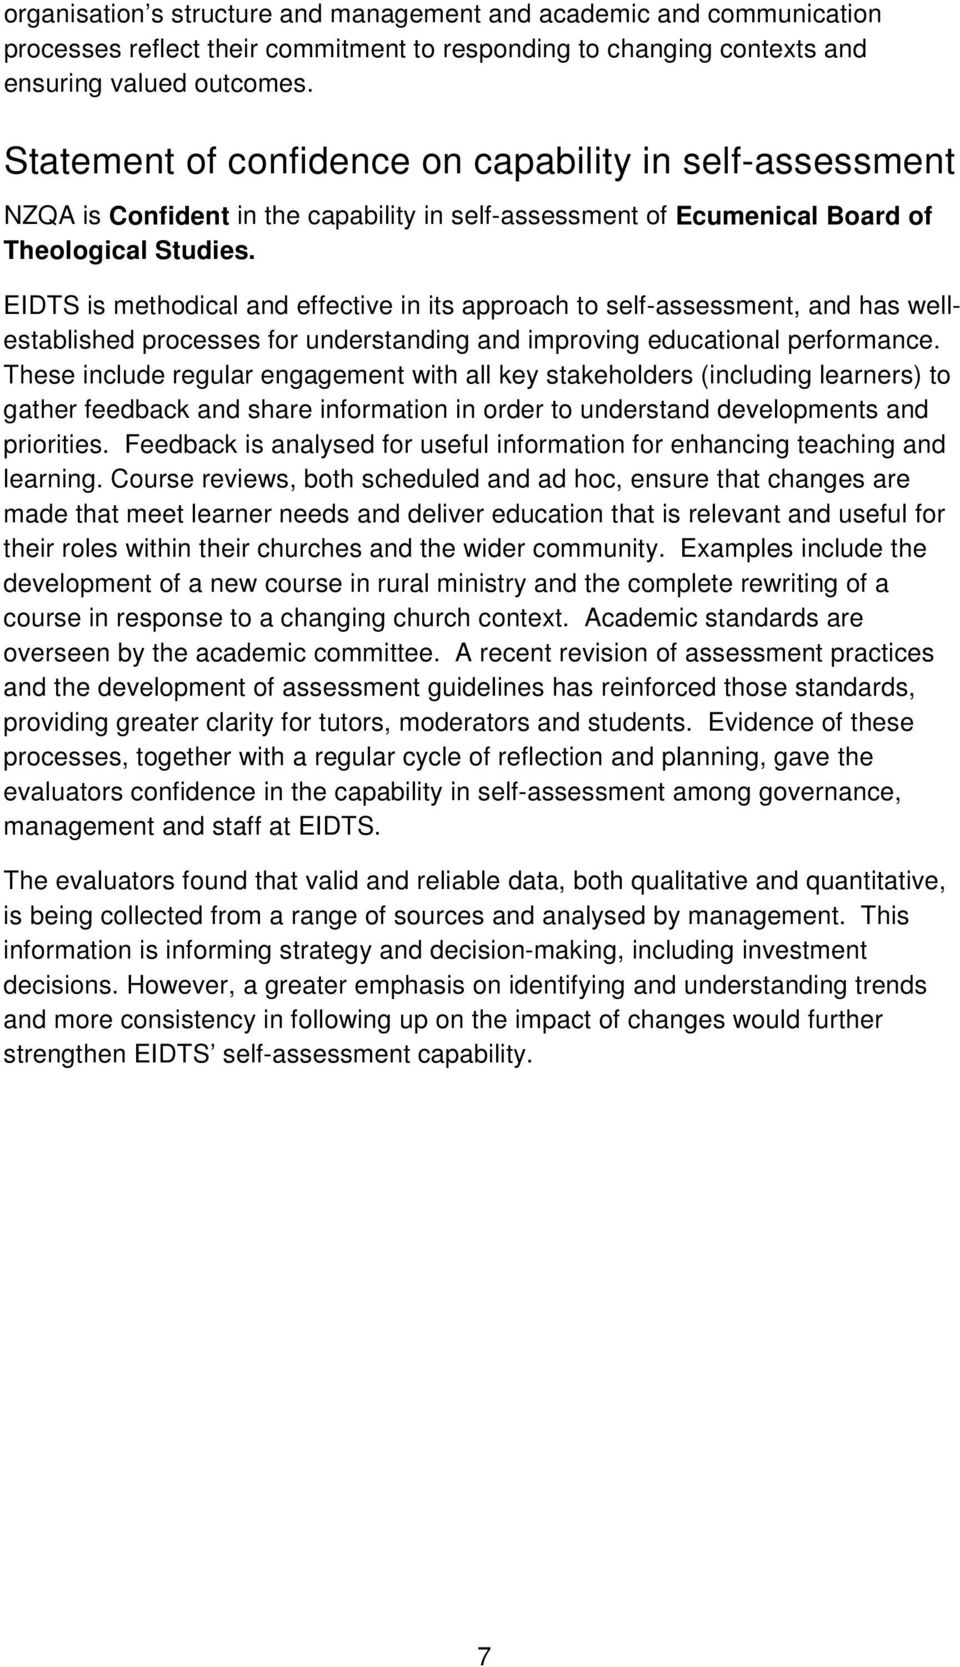 EIDTS is methodical and effective in its approach to self-assessment, and has wellestablished processes for understanding and improving educational performance.